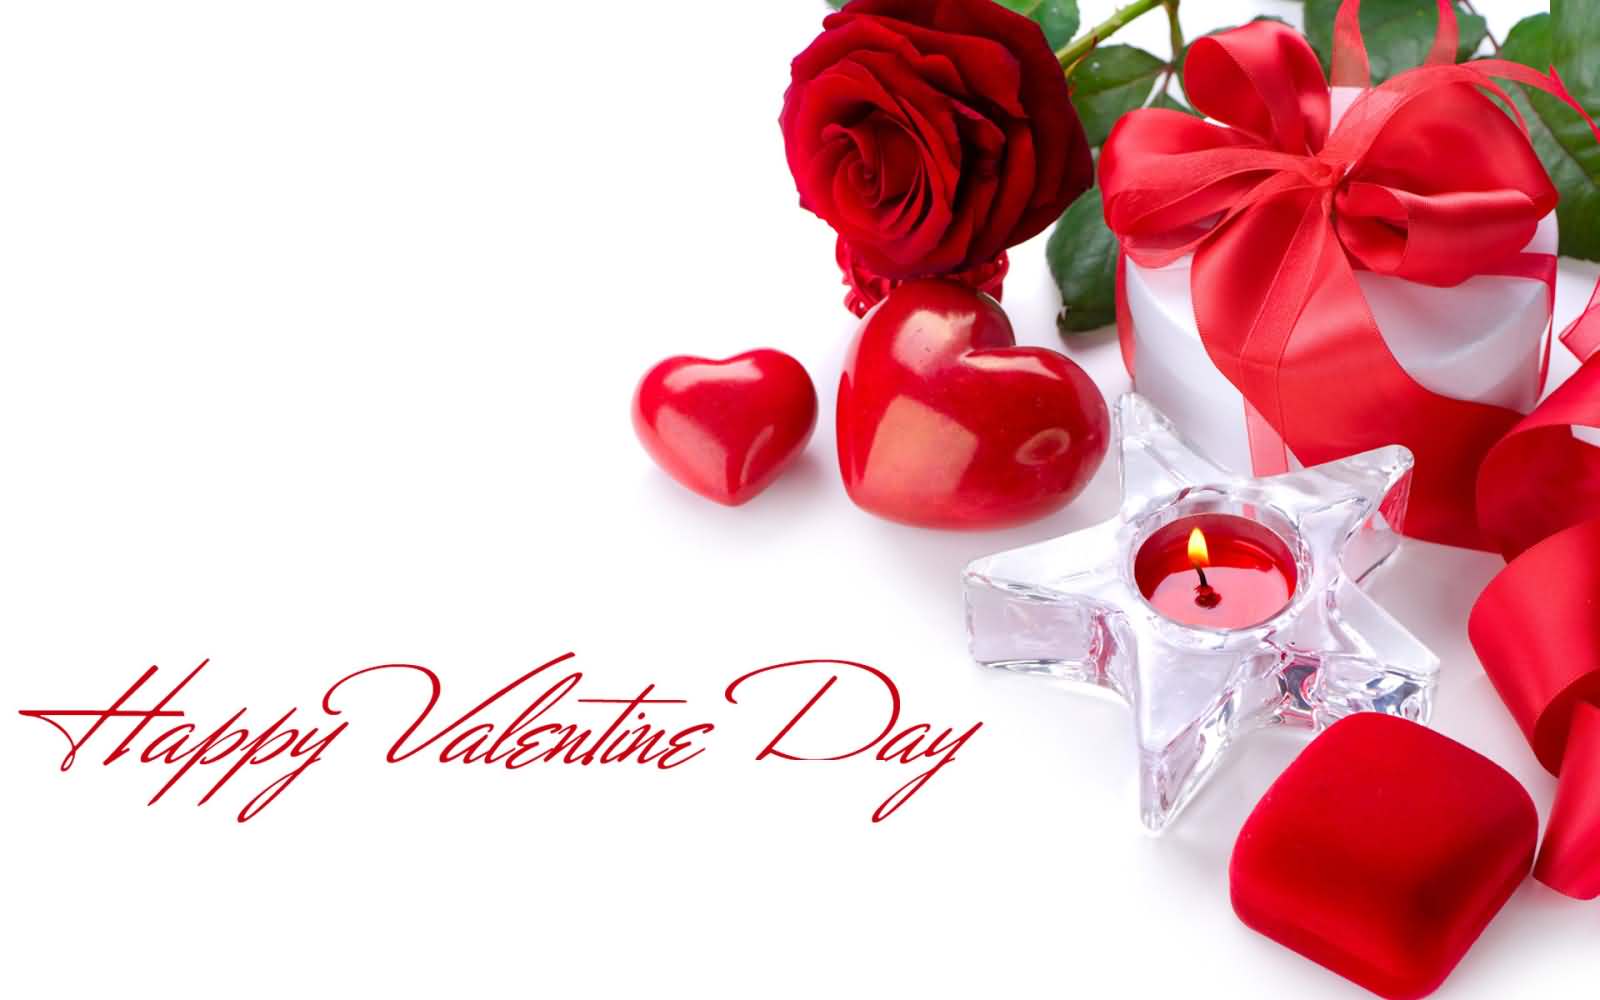 Happy Valentine’s Day greetings wallpaper